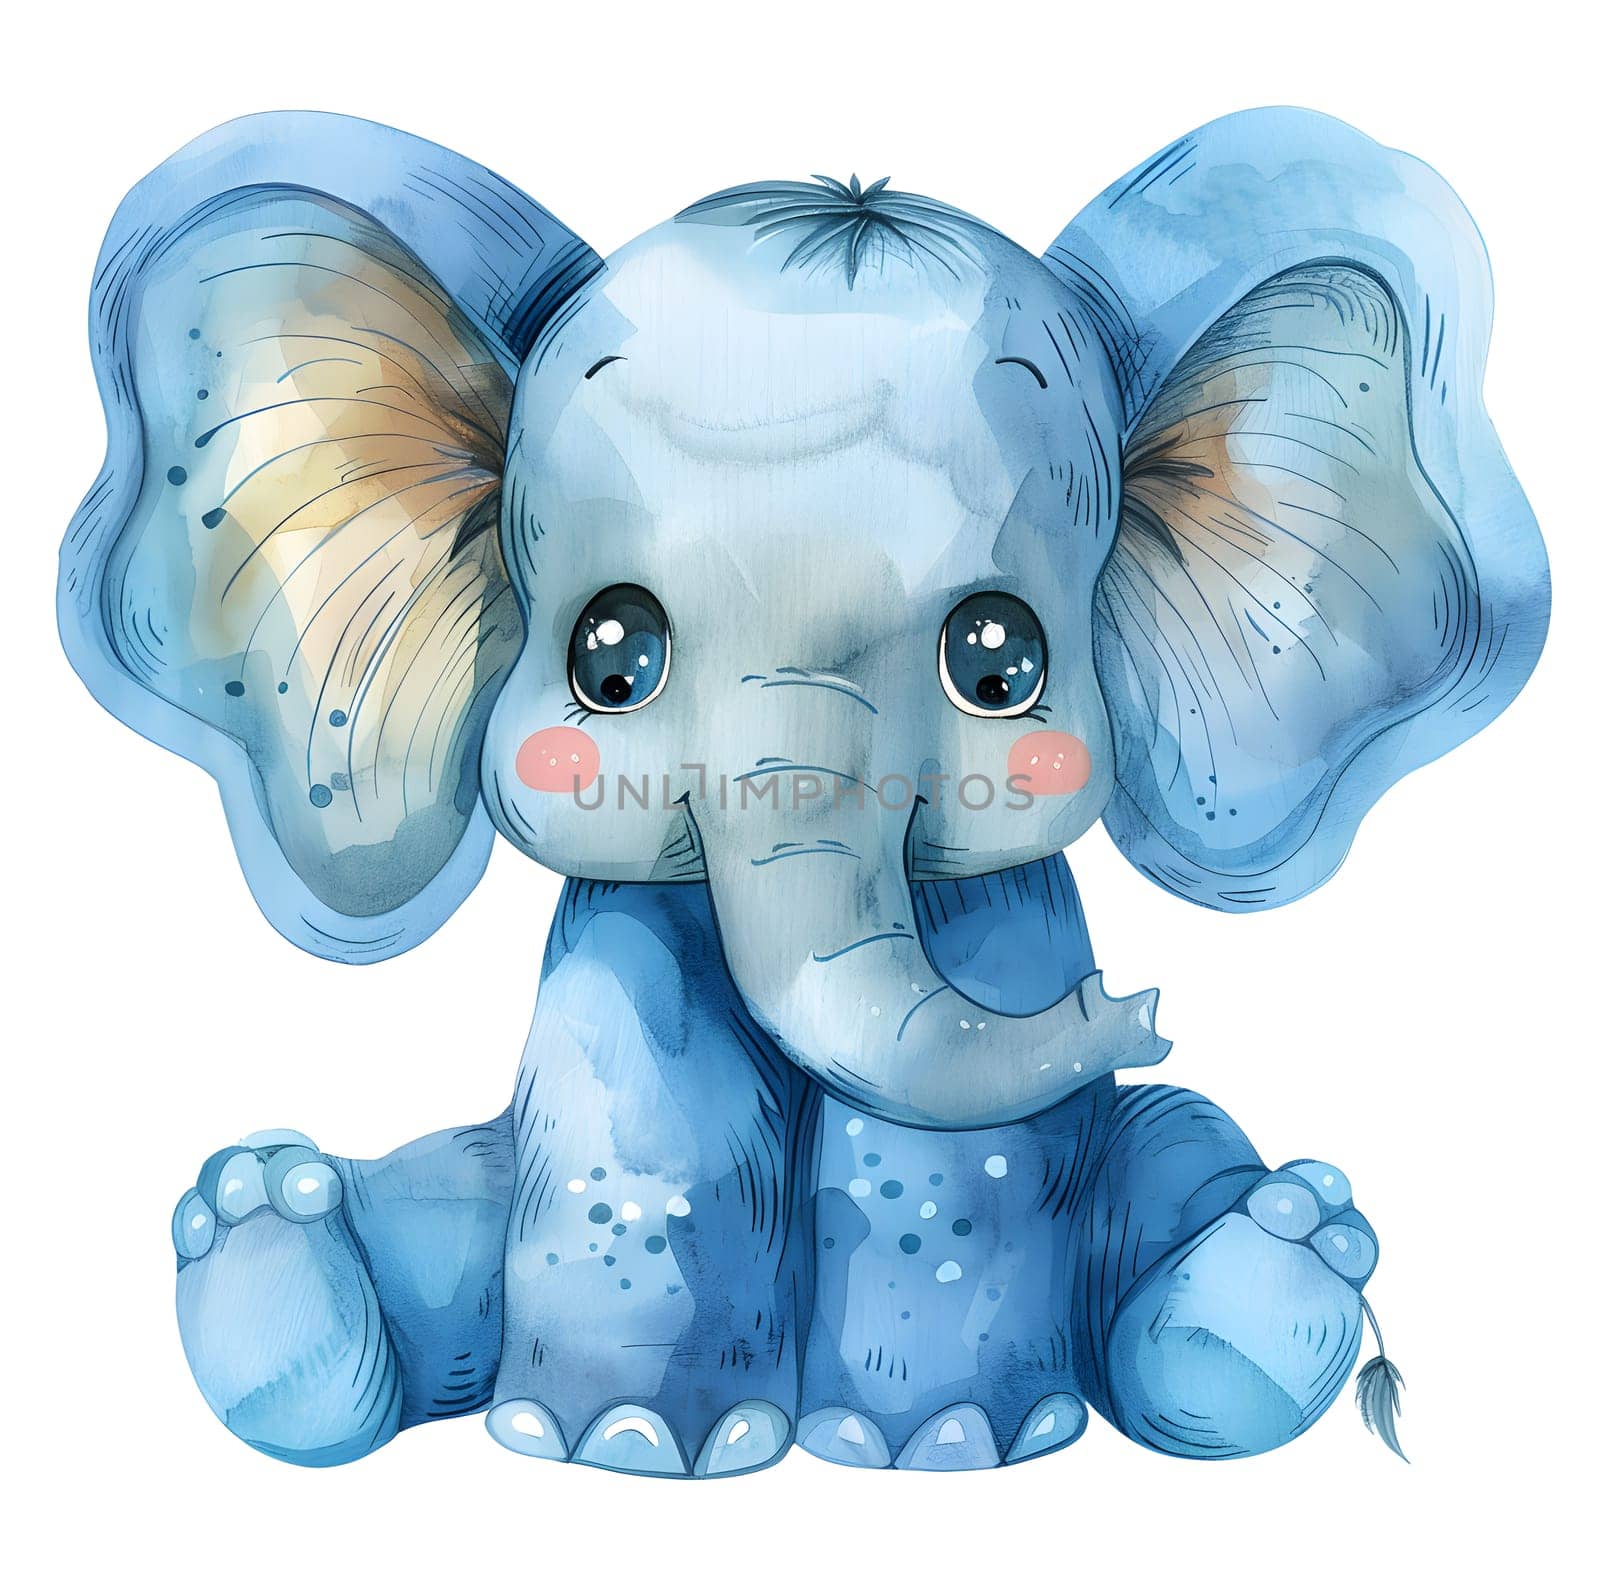 A cartoon baby blue elephant toy is sitting on a white background, showing a cute smile. This mammal organism is depicted in a gesture of relaxation, resembling working elephants